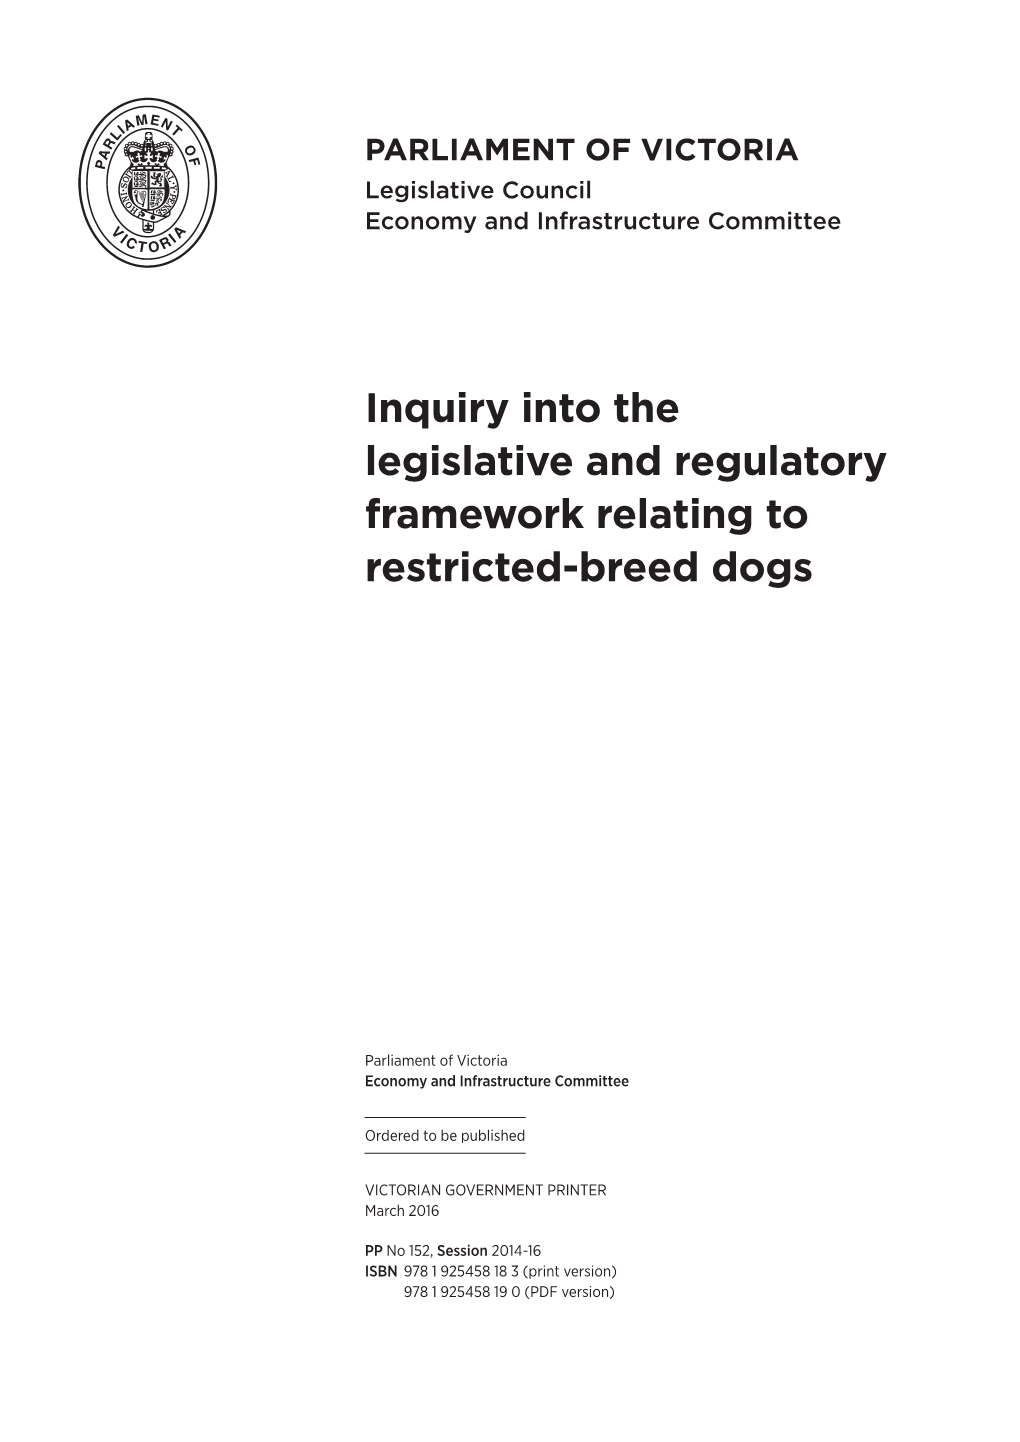 Inquiry Into the Legislative and Regulatory Framework Relating to Restricted‑Breed Dogs